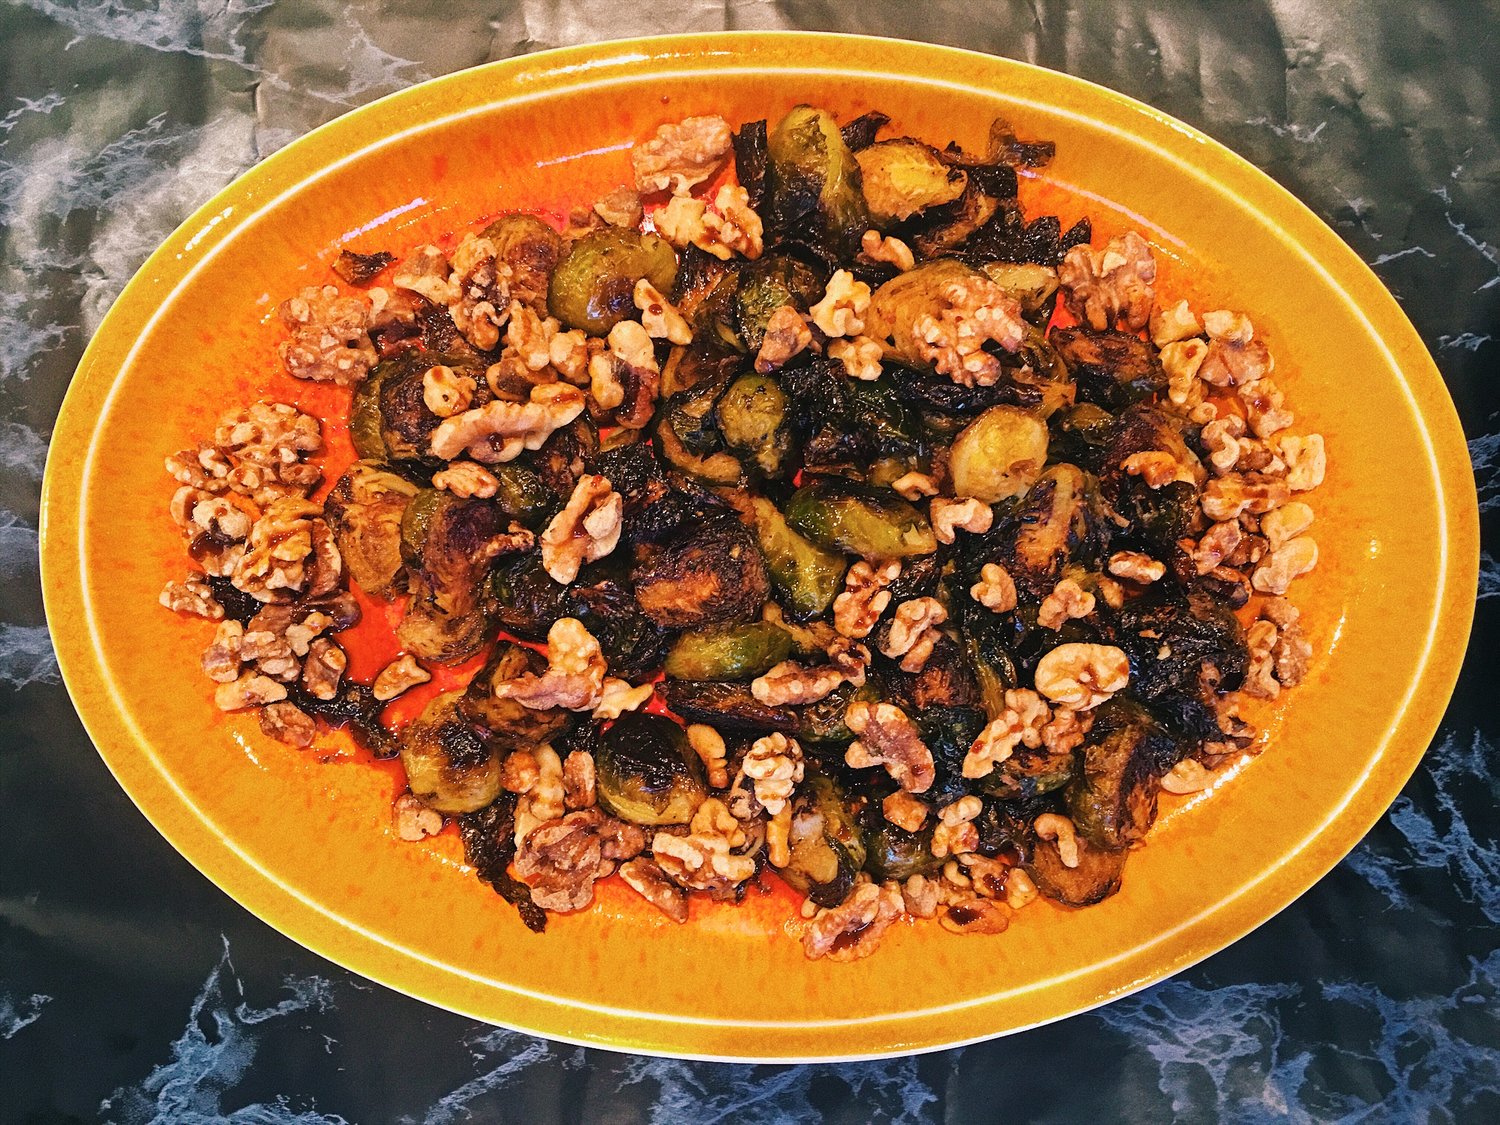 Roasted Brussel Sprouts With Walnuts and Pomegranate Molasses